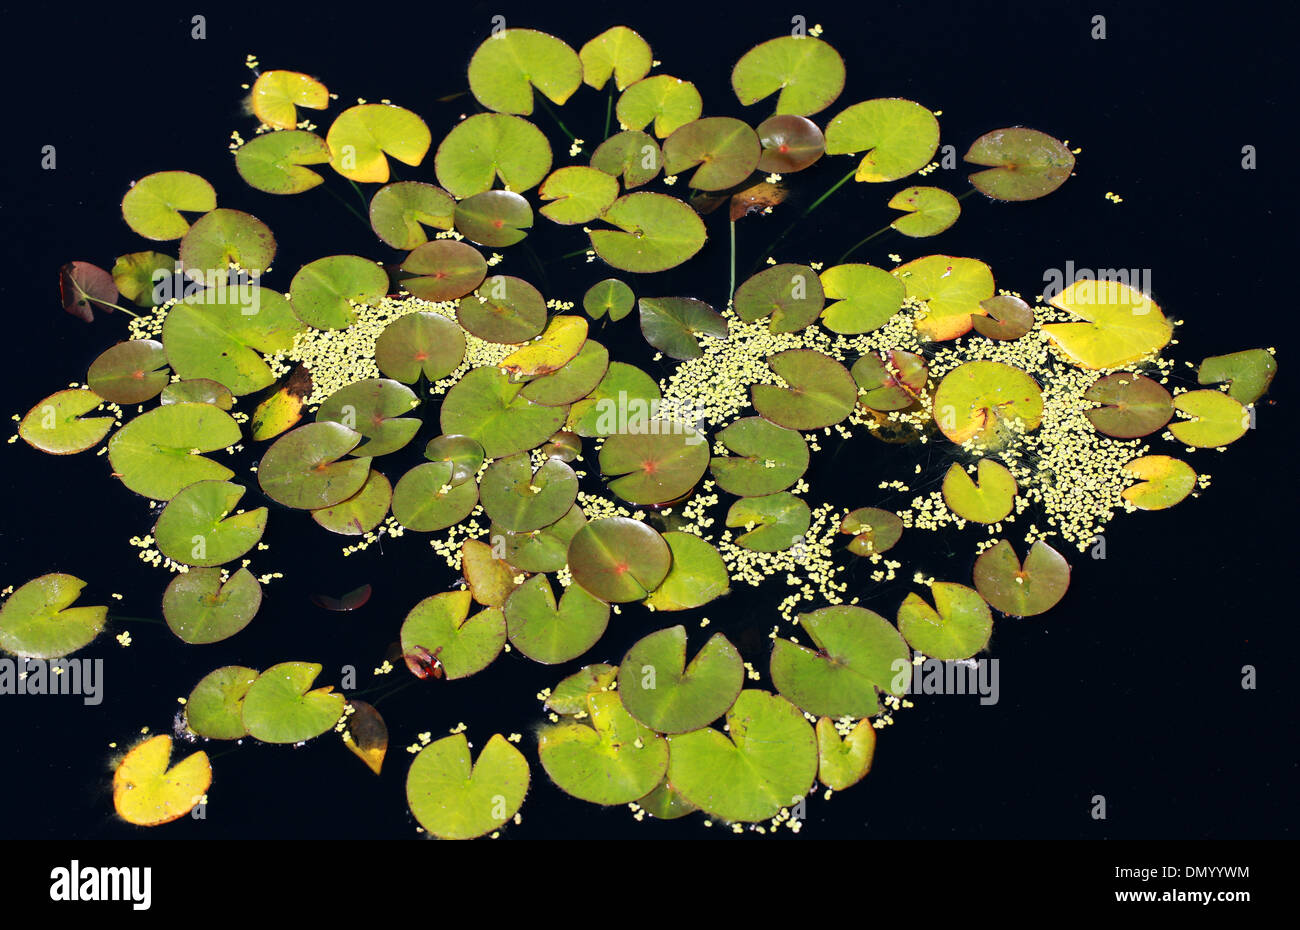 Lily pads. Stock Photo